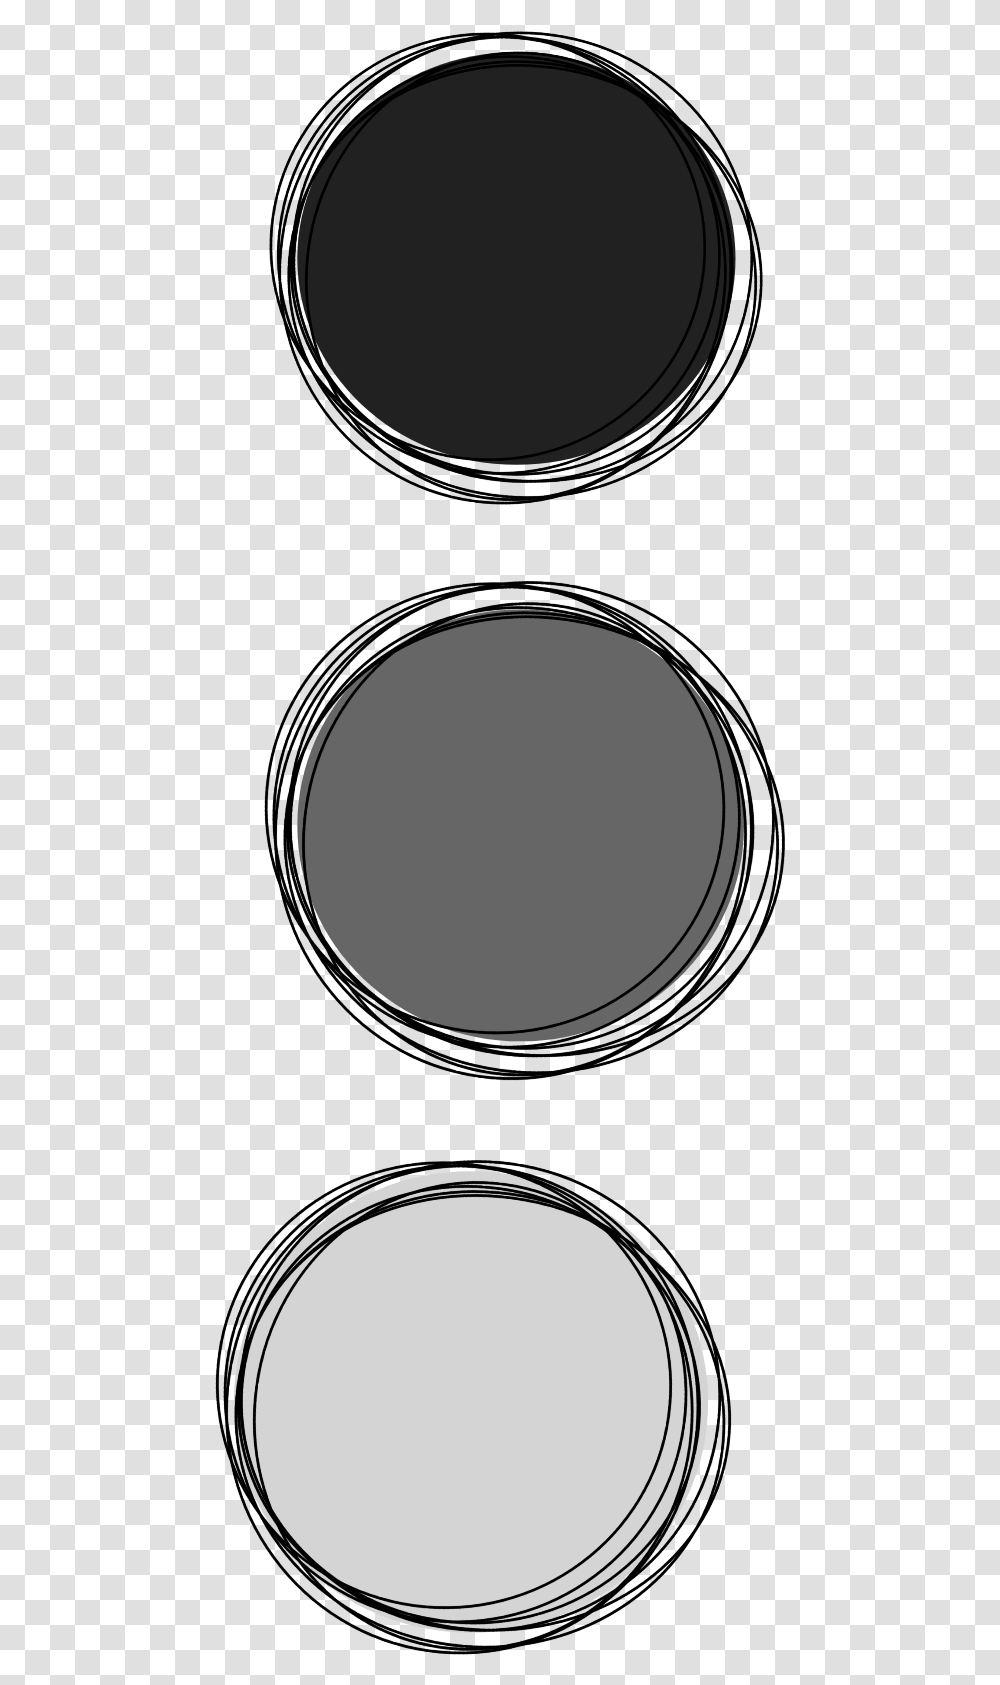 Circle Circles Aesthetic Sticker By White And Black Aesthetics, Sphere, Text, Texture, Gray Transparent Png